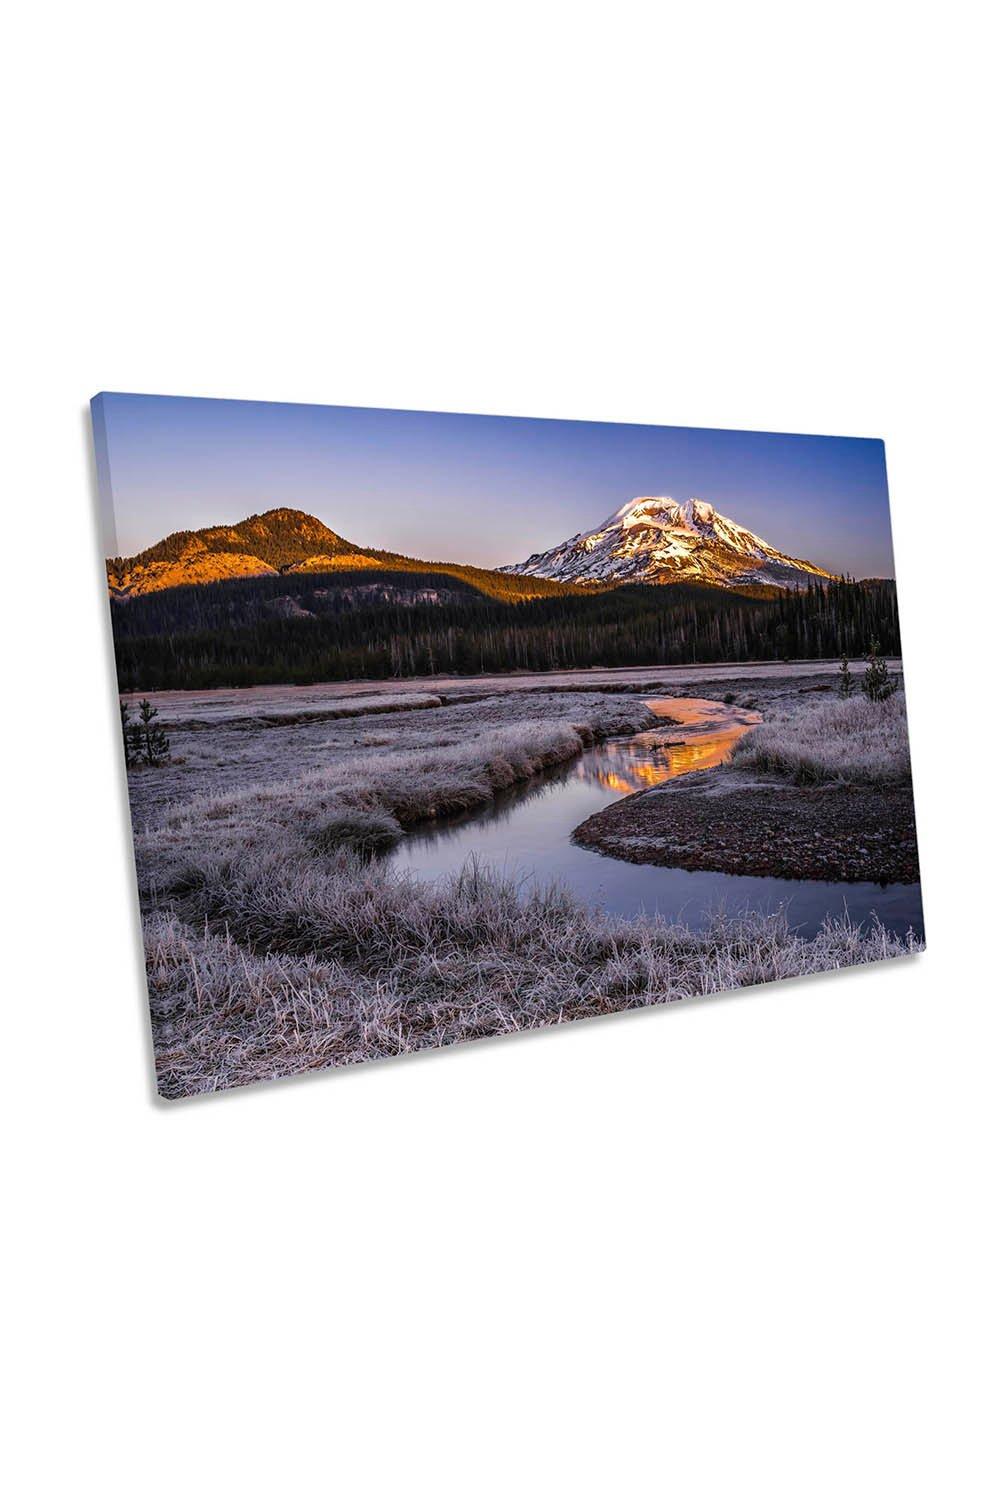 Daybreak Oregon Mountain Frosty Morning Canvas Wall Art Picture Print